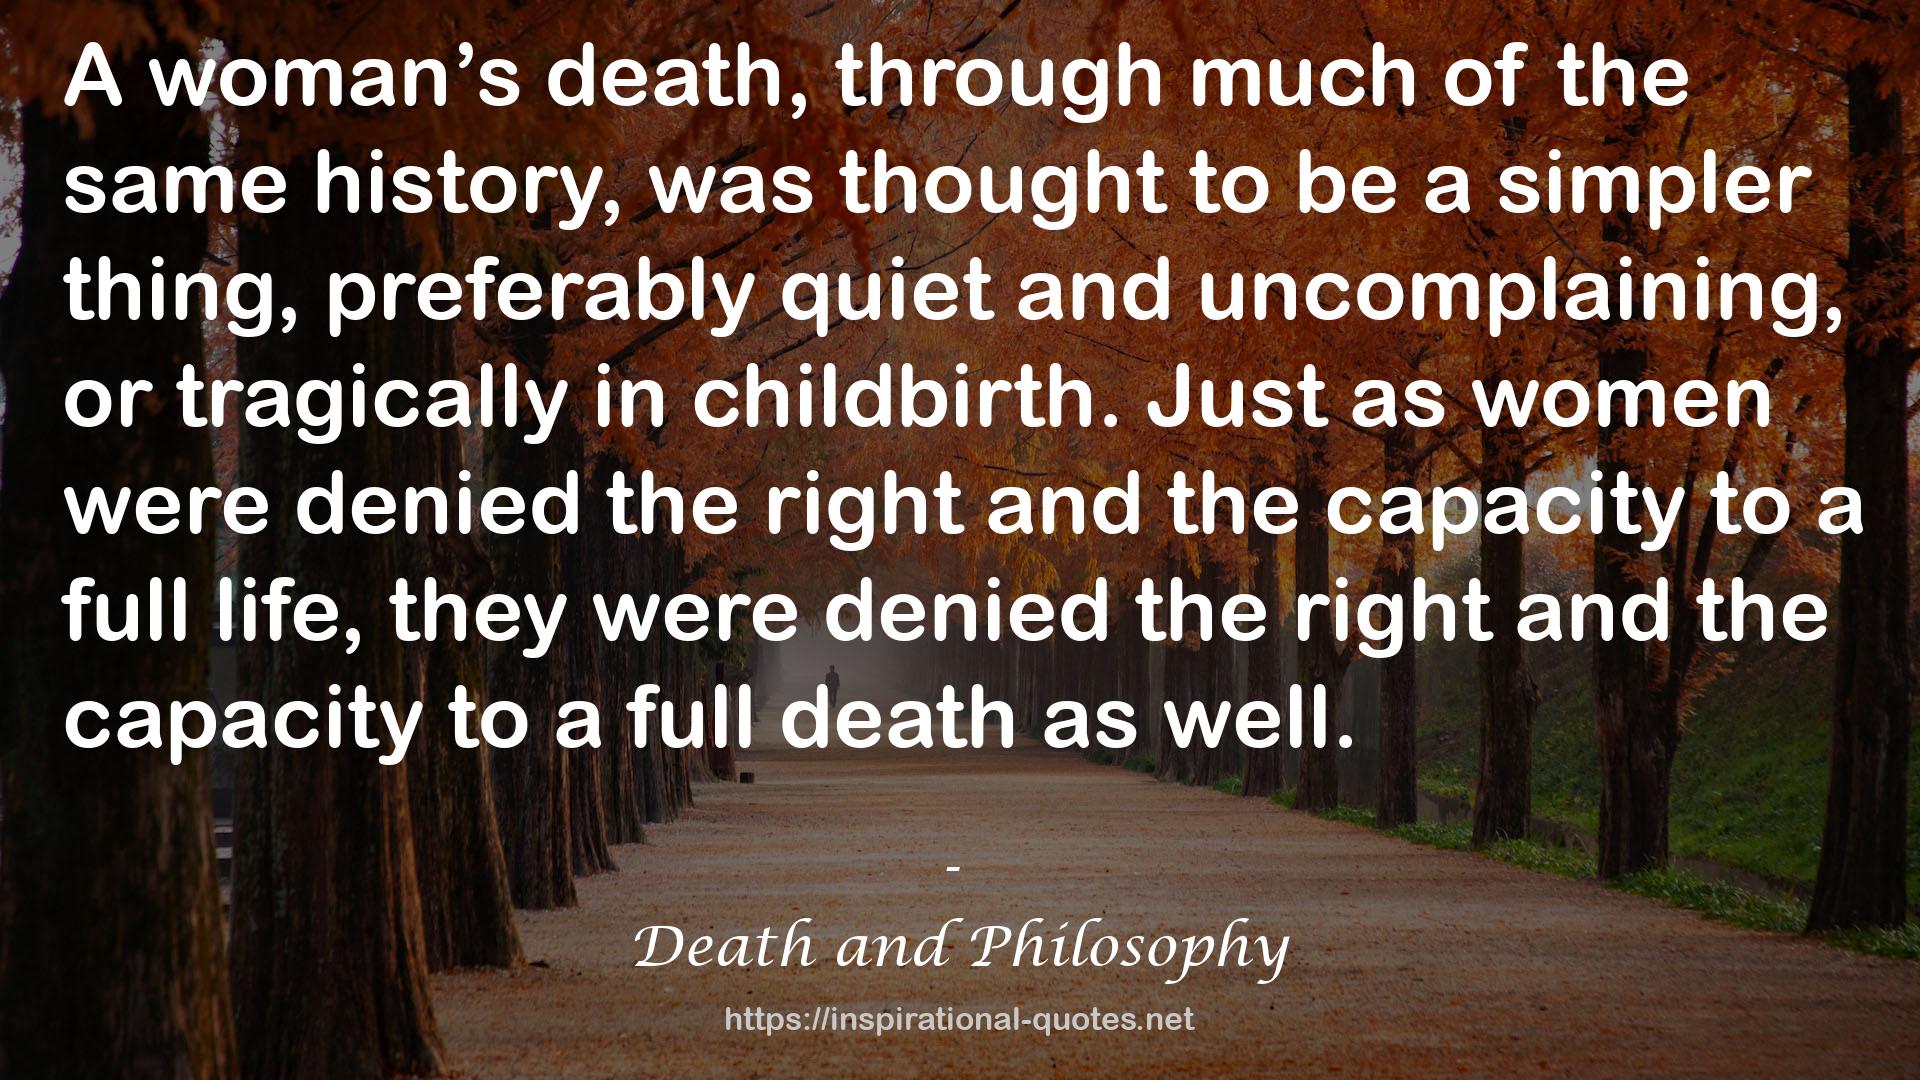 Death and Philosophy QUOTES